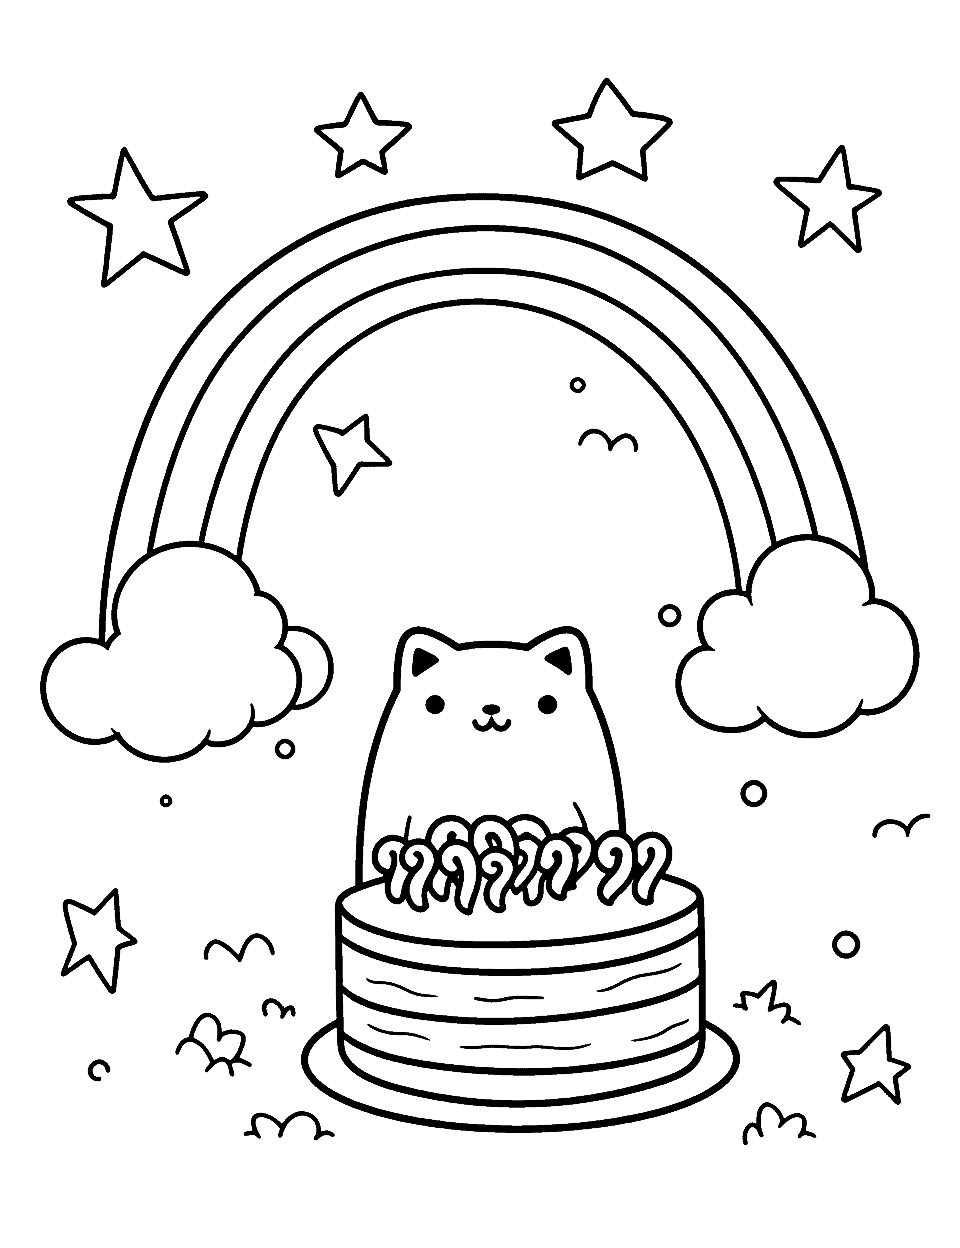 Pusheen Rainbow Party Coloring Page - The popular cat character Pusheen, enjoying a party with a rainbow cake.